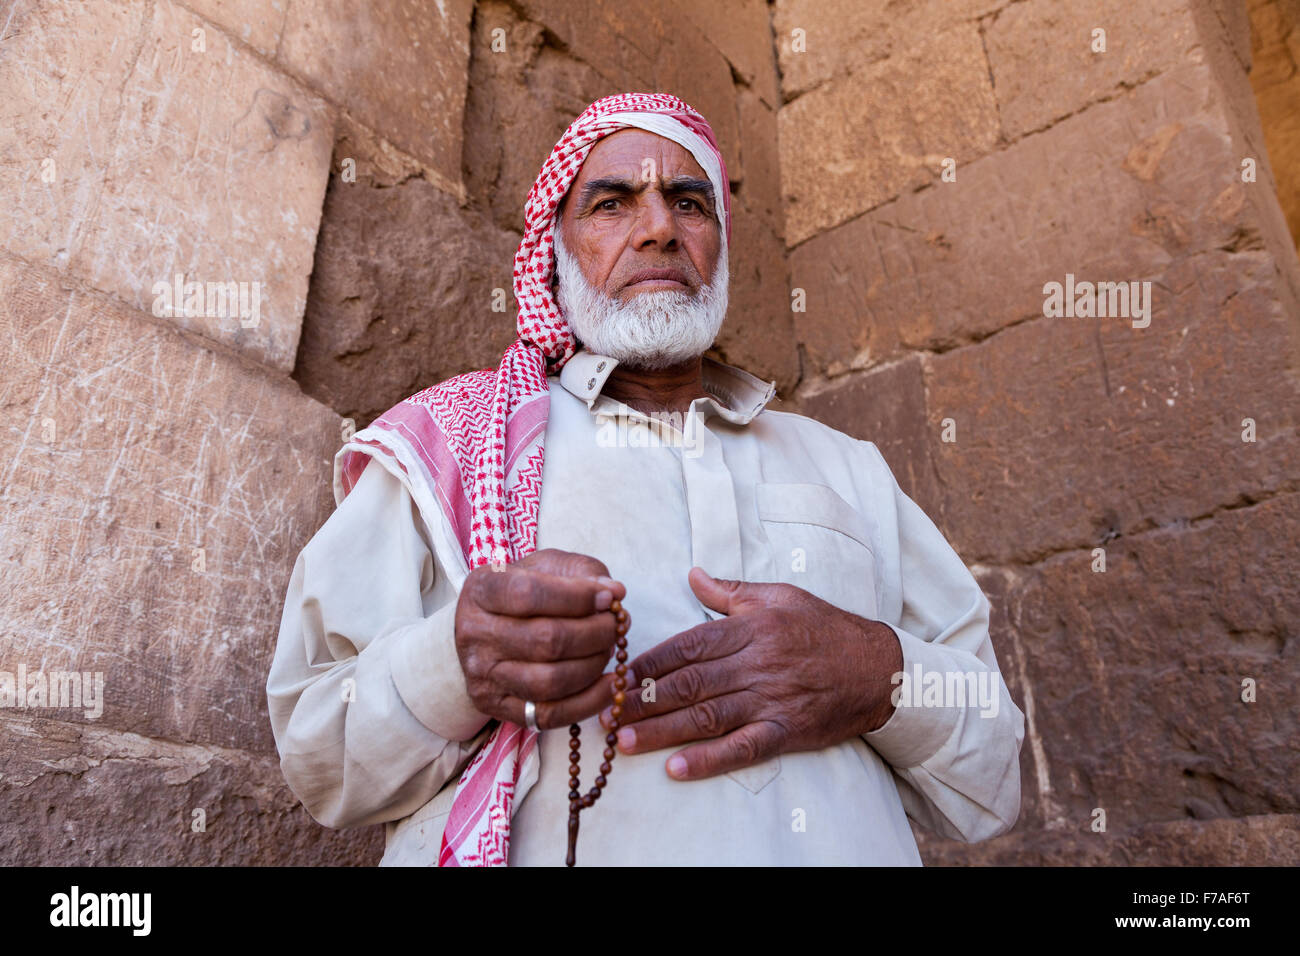 old man with his traditional dressing stands in front of the sandstones of an ancient building in Harran Plain, Sanliurfa,Turkey Stock Photo